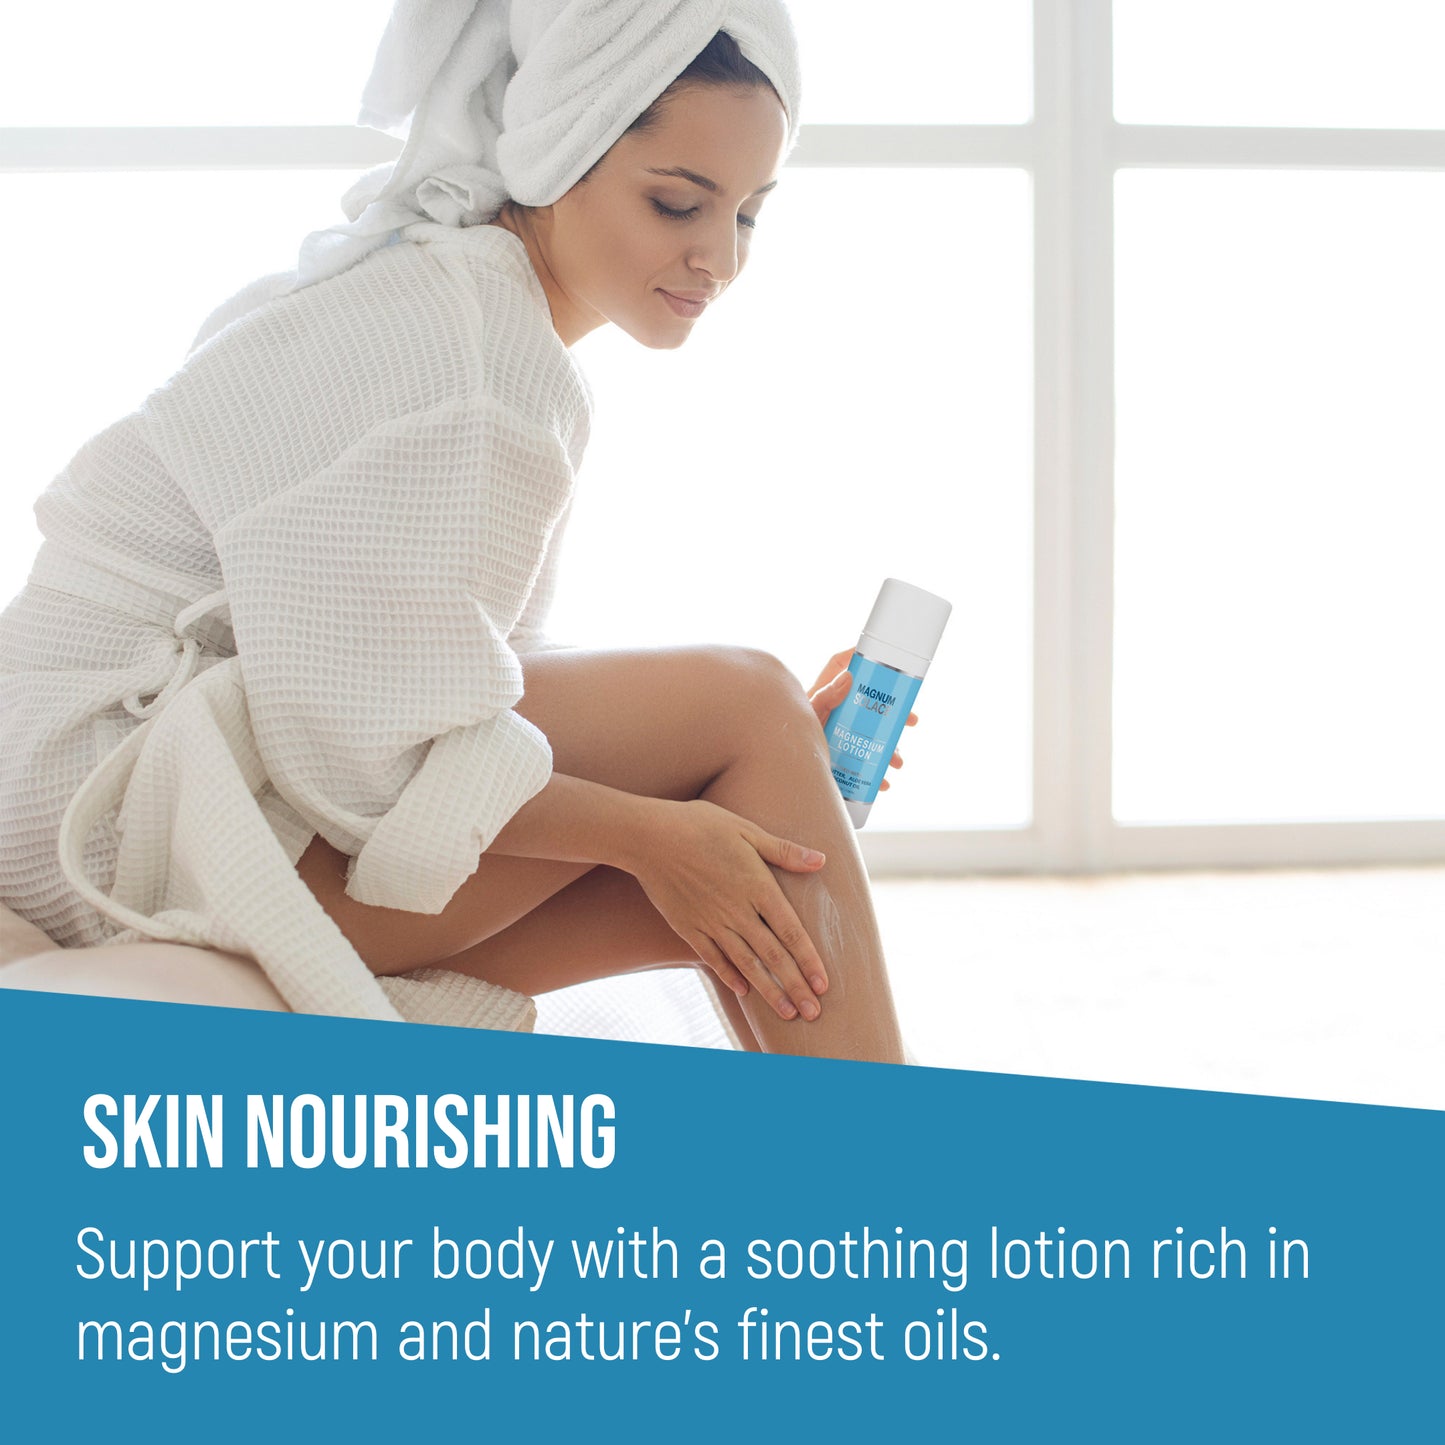 Magnesium Lotion with Aloe, Shea and Coconut Oil for Leg Cramps & Deep Relief (Lavender)